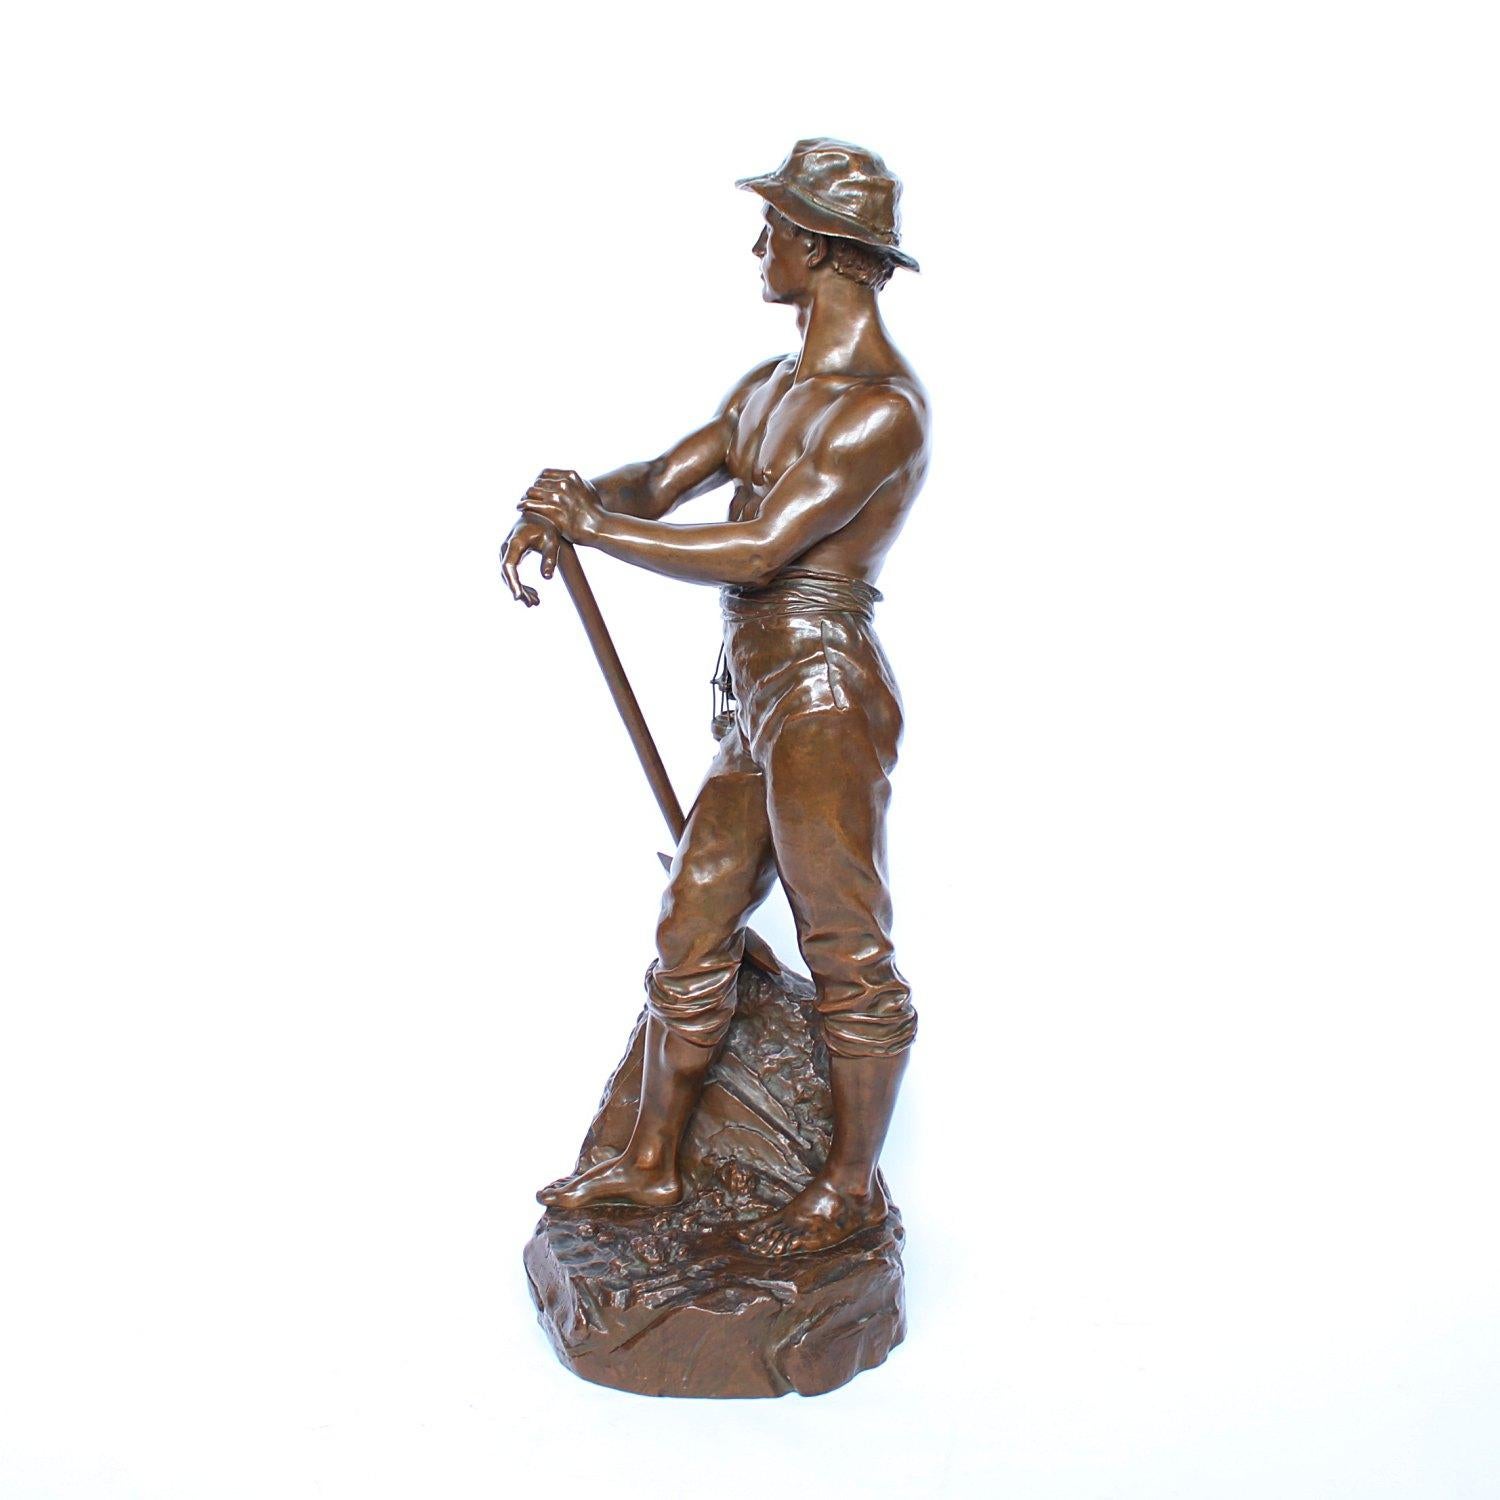 A large, 3ft tall bronze figure of a miner standing bare chested on an integral naturalistic base holding a pickaxe and a miner's lamp. Inscribed 'Mineur par Levy Salon des Beaux Arts', signed 'CH LEVY' and with the inscription: 'Bronze Garanti Au